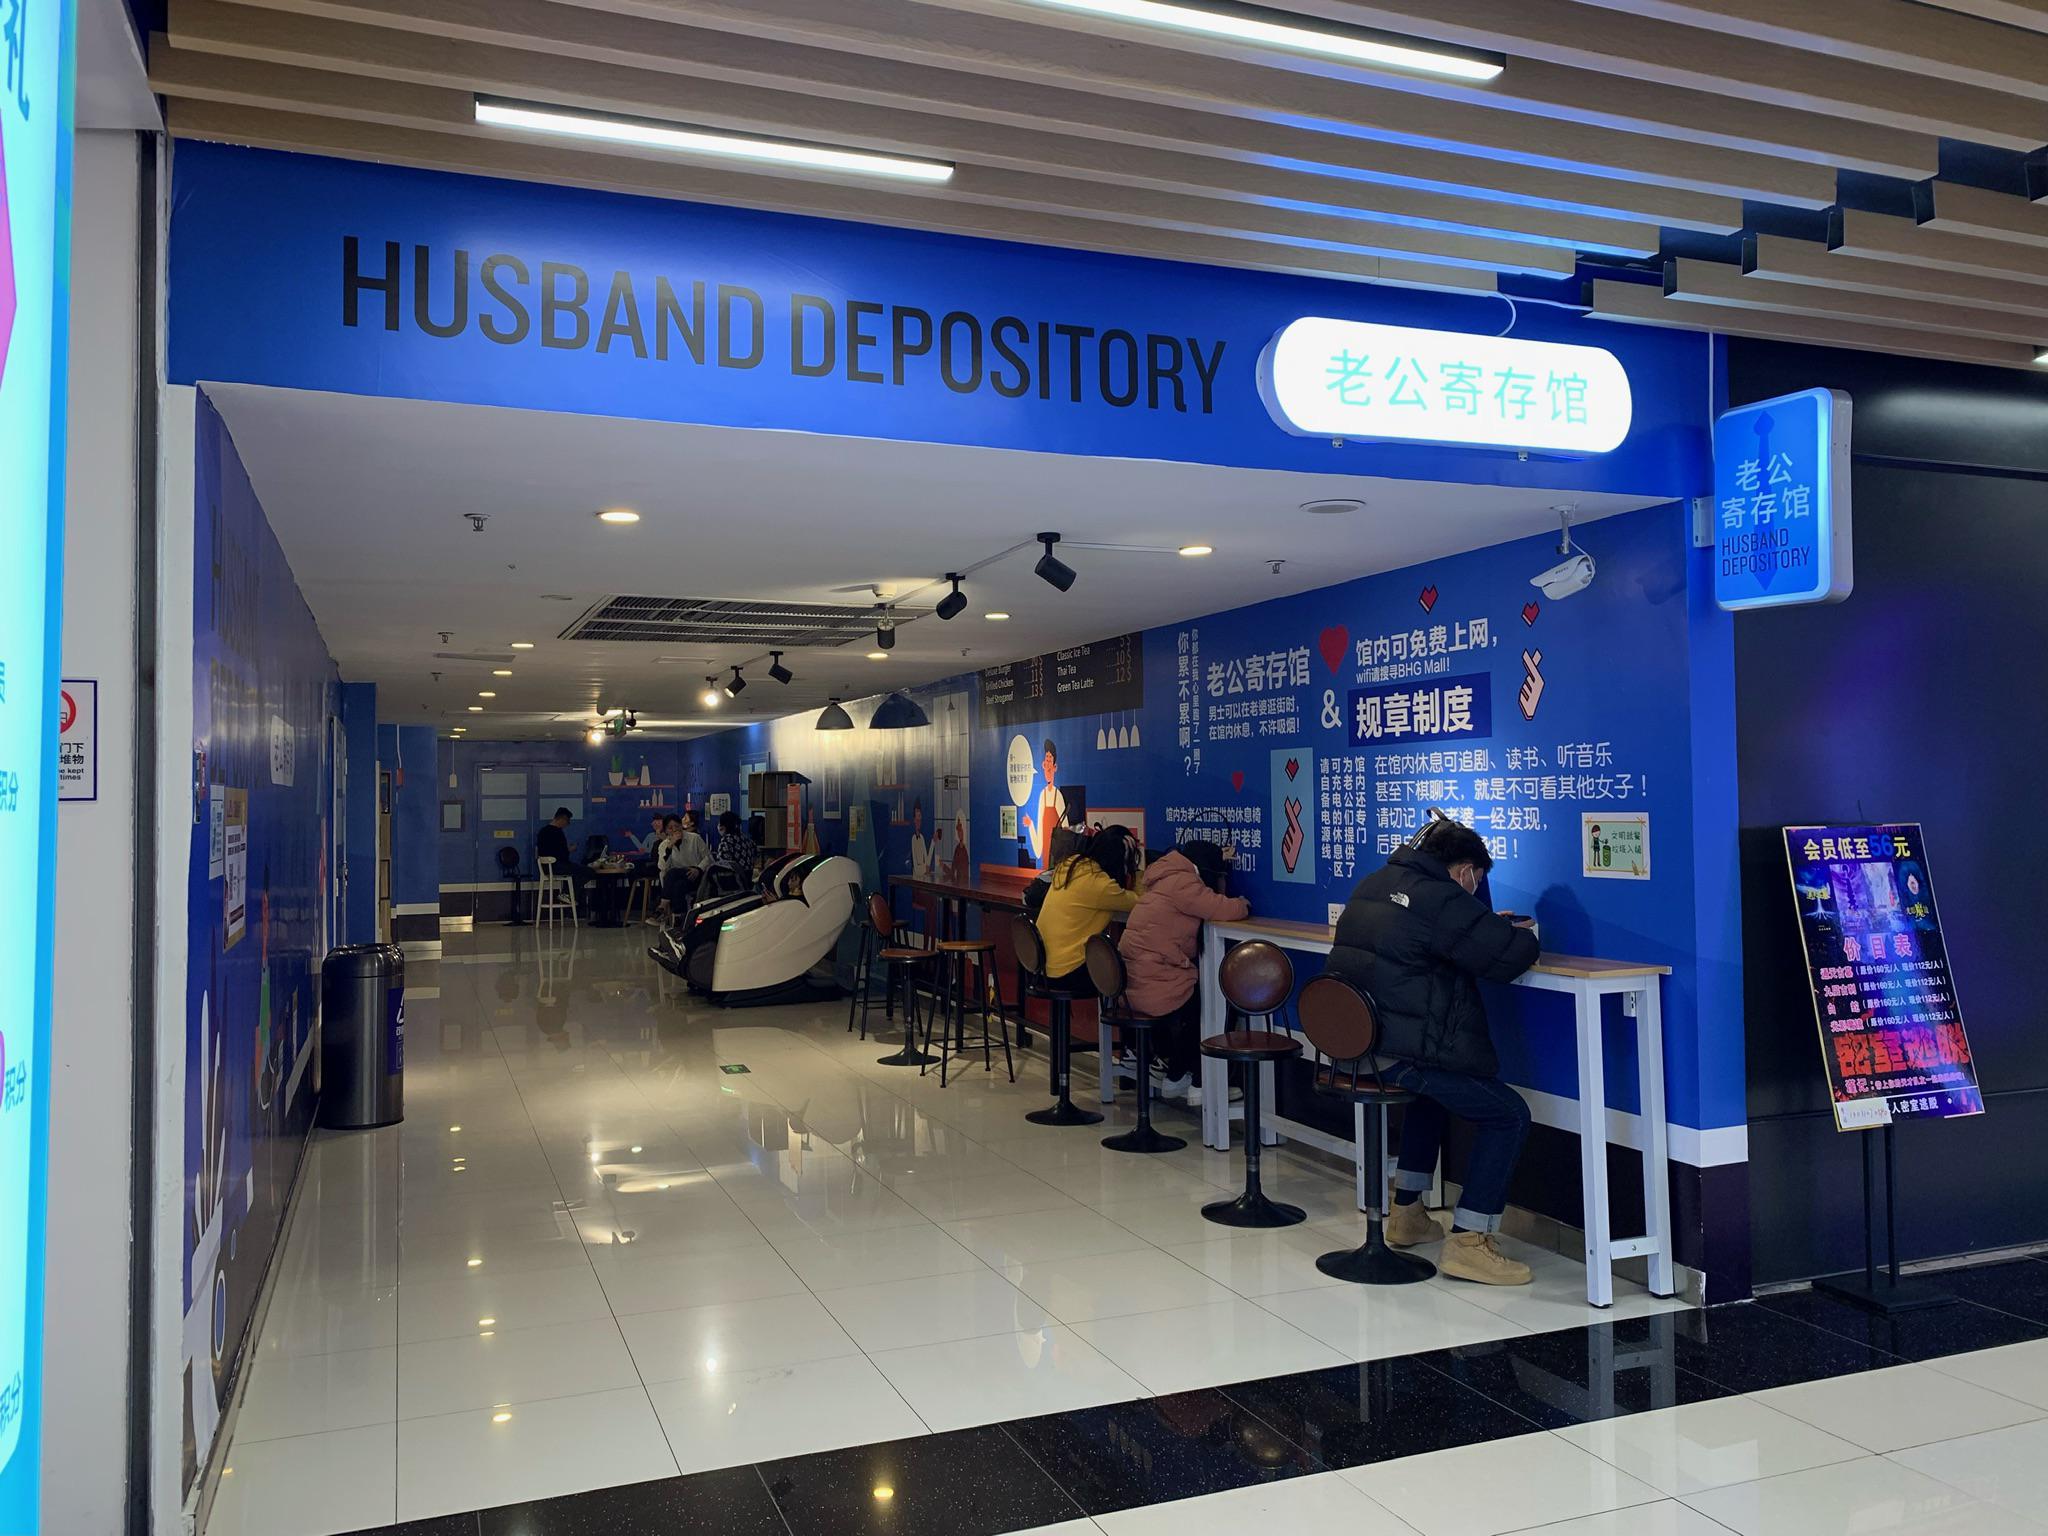 This mall has a “husband depository” with massage chairs and phone chargers.